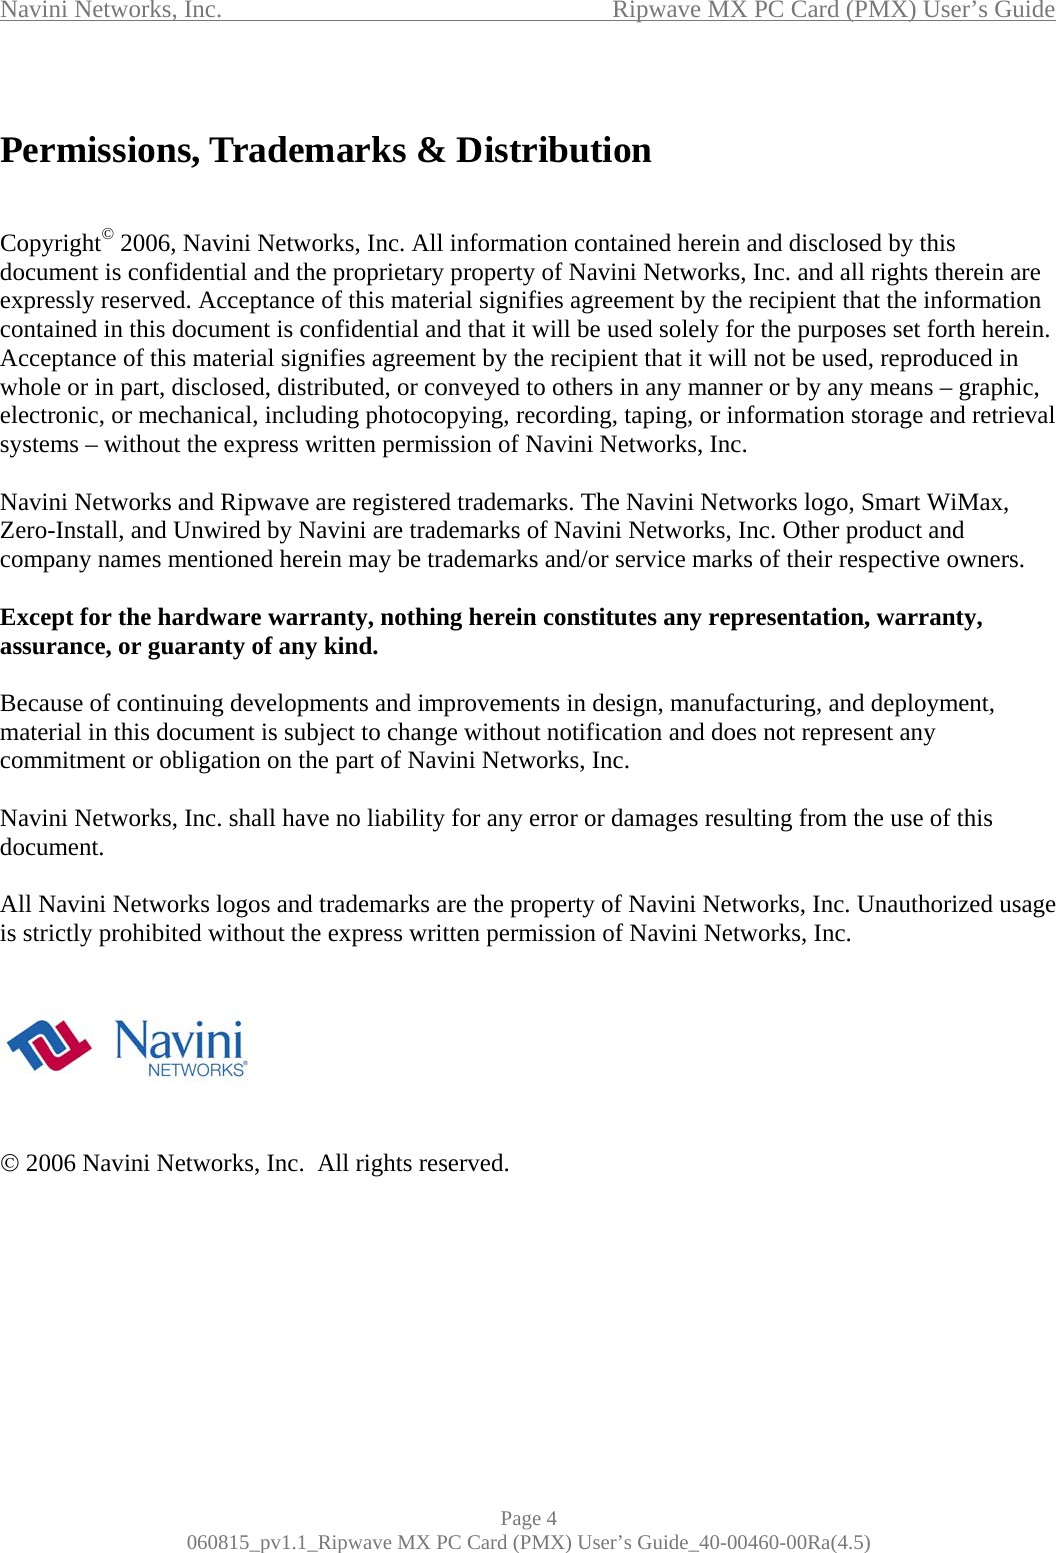 Navini Networks, Inc.                                           Ripwave MX PC Card (PMX) User’s Guide  Permissions, Trademarks &amp; Distribution   Copyright© 2006, Navini Networks, Inc. All information contained herein and disclosed by this document is confidential and the proprietary property of Navini Networks, Inc. and all rights therein are expressly reserved. Acceptance of this material signifies agreement by the recipient that the information contained in this document is confidential and that it will be used solely for the purposes set forth herein. Acceptance of this material signifies agreement by the recipient that it will not be used, reproduced in whole or in part, disclosed, distributed, or conveyed to others in any manner or by any means – graphic, electronic, or mechanical, including photocopying, recording, taping, or information storage and retrieval systems – without the express written permission of Navini Networks, Inc.  Navini Networks and Ripwave are registered trademarks. The Navini Networks logo, Smart WiMax, Zero-Install, and Unwired by Navini are trademarks of Navini Networks, Inc. Other product and company names mentioned herein may be trademarks and/or service marks of their respective owners.  Except for the hardware warranty, nothing herein constitutes any representation, warranty, assurance, or guaranty of any kind.  Because of continuing developments and improvements in design, manufacturing, and deployment, material in this document is subject to change without notification and does not represent any commitment or obligation on the part of Navini Networks, Inc.  Navini Networks, Inc. shall have no liability for any error or damages resulting from the use of this document.  All Navini Networks logos and trademarks are the property of Navini Networks, Inc. Unauthorized usage is strictly prohibited without the express written permission of Navini Networks, Inc.        © 2006 Navini Networks, Inc.  All rights reserved.       Page 4 060815_pv1.1_Ripwave MX PC Card (PMX) User’s Guide_40-00460-00Ra(4.5) 